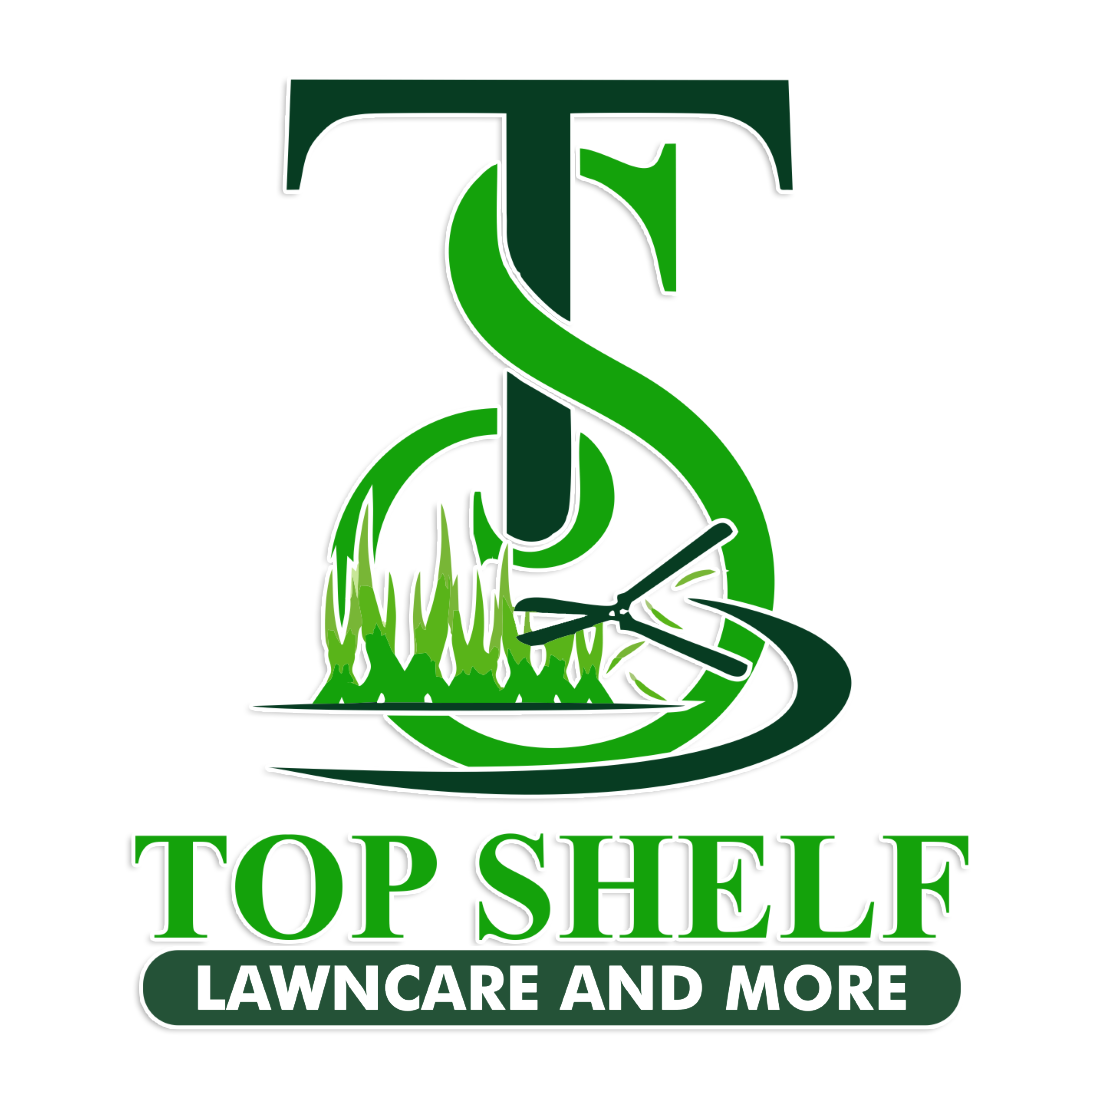 Top Shelf Lawn Care and More LLC